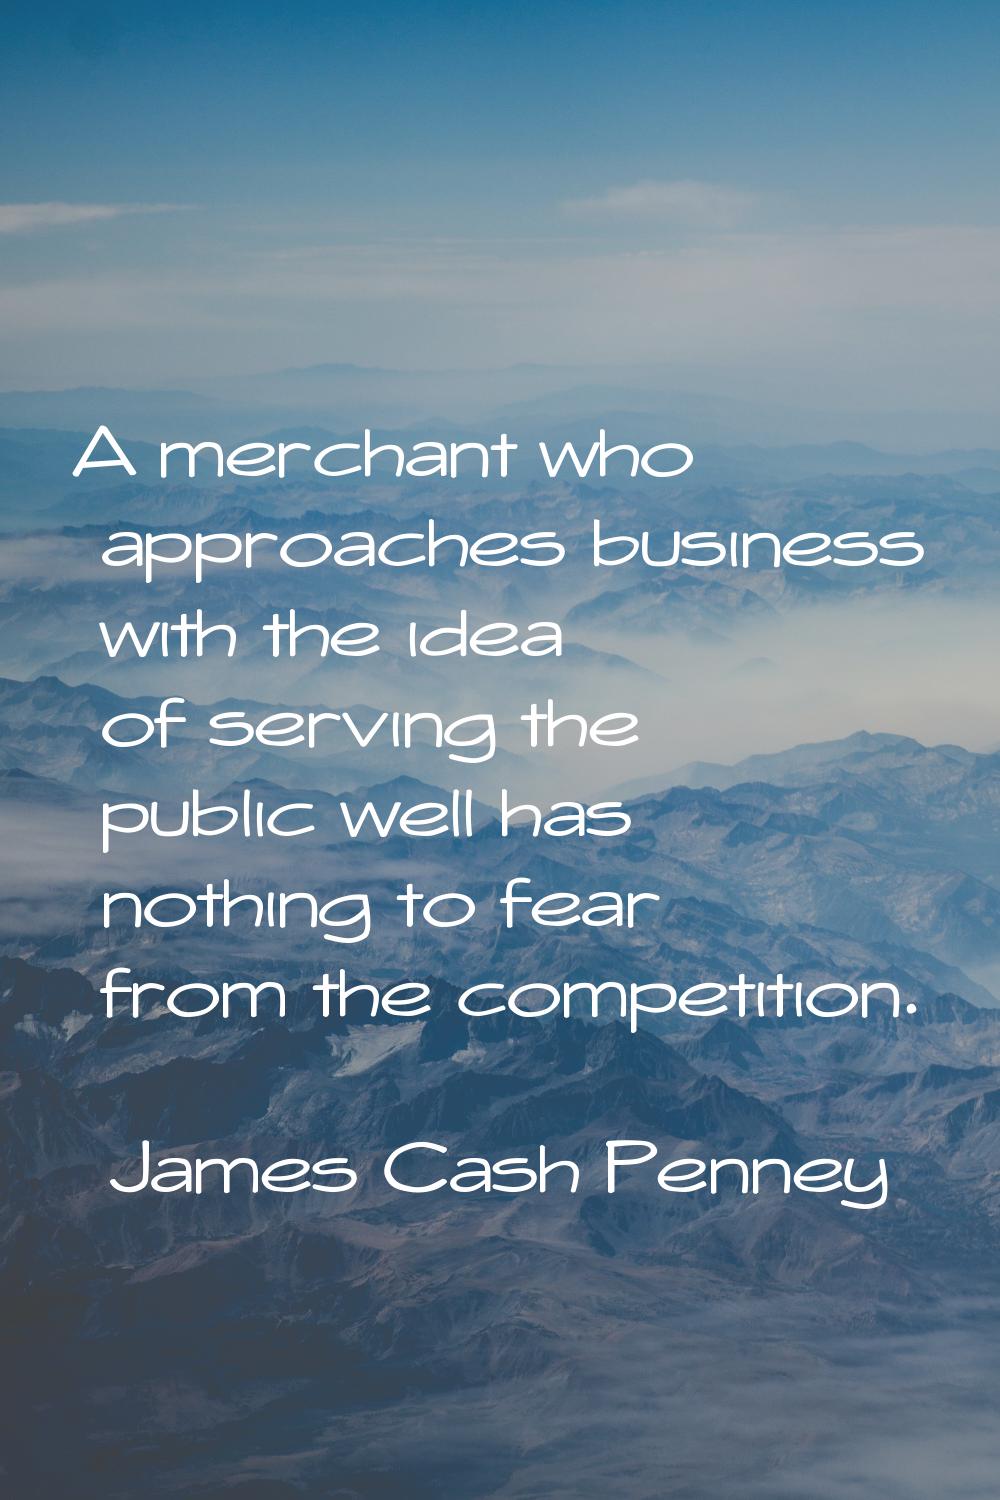 A merchant who approaches business with the idea of serving the public well has nothing to fear fro